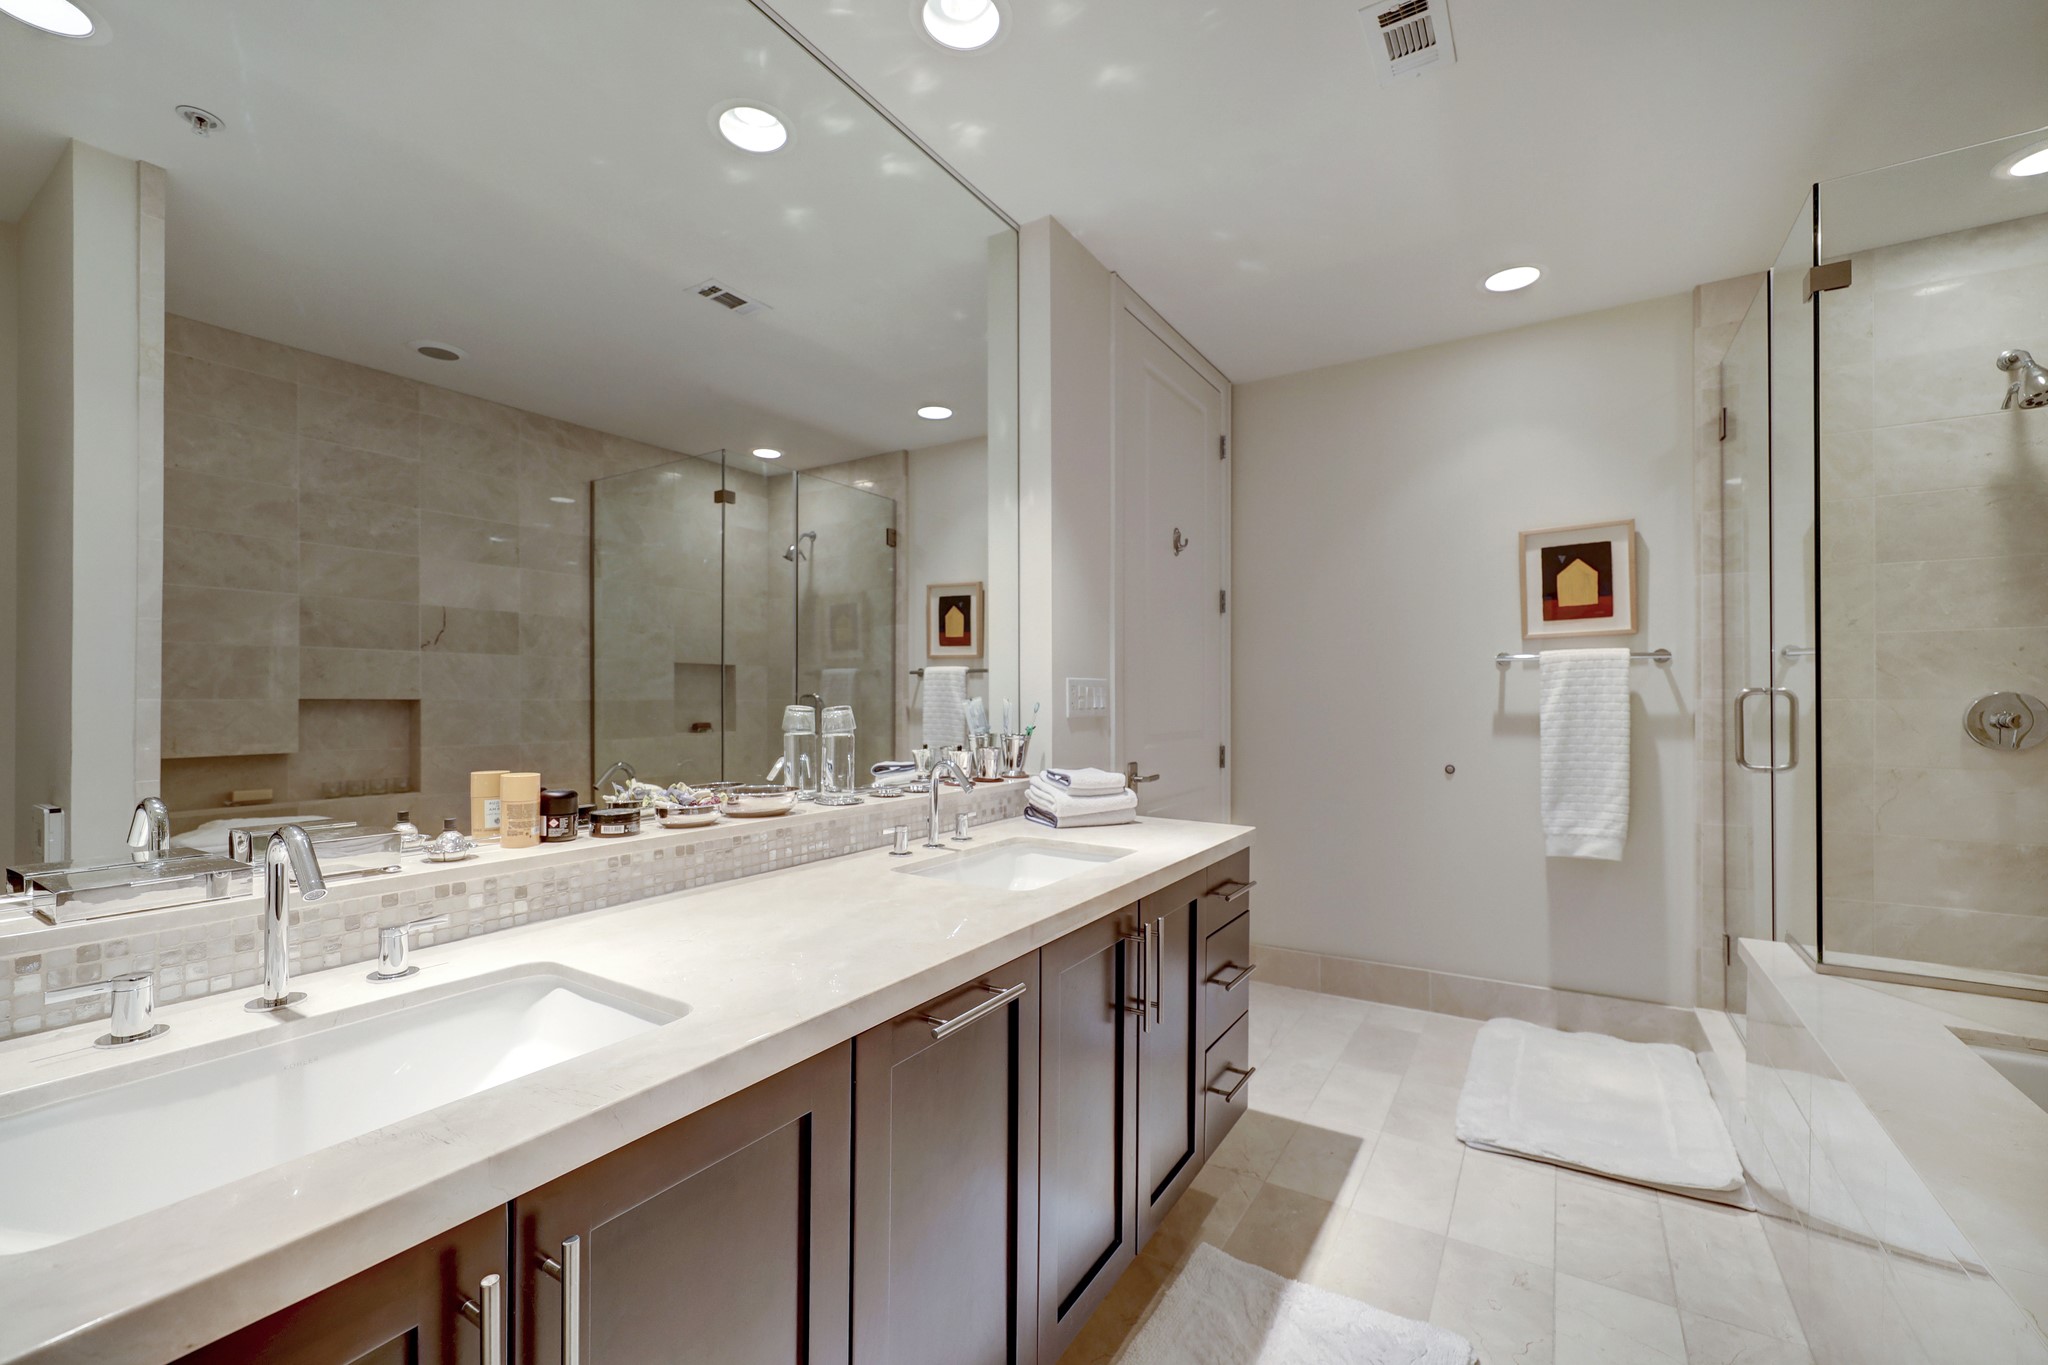 The Primary bath has double sinks, marble counters, wood cabinetry jetted tub and separate glass-wall shower.